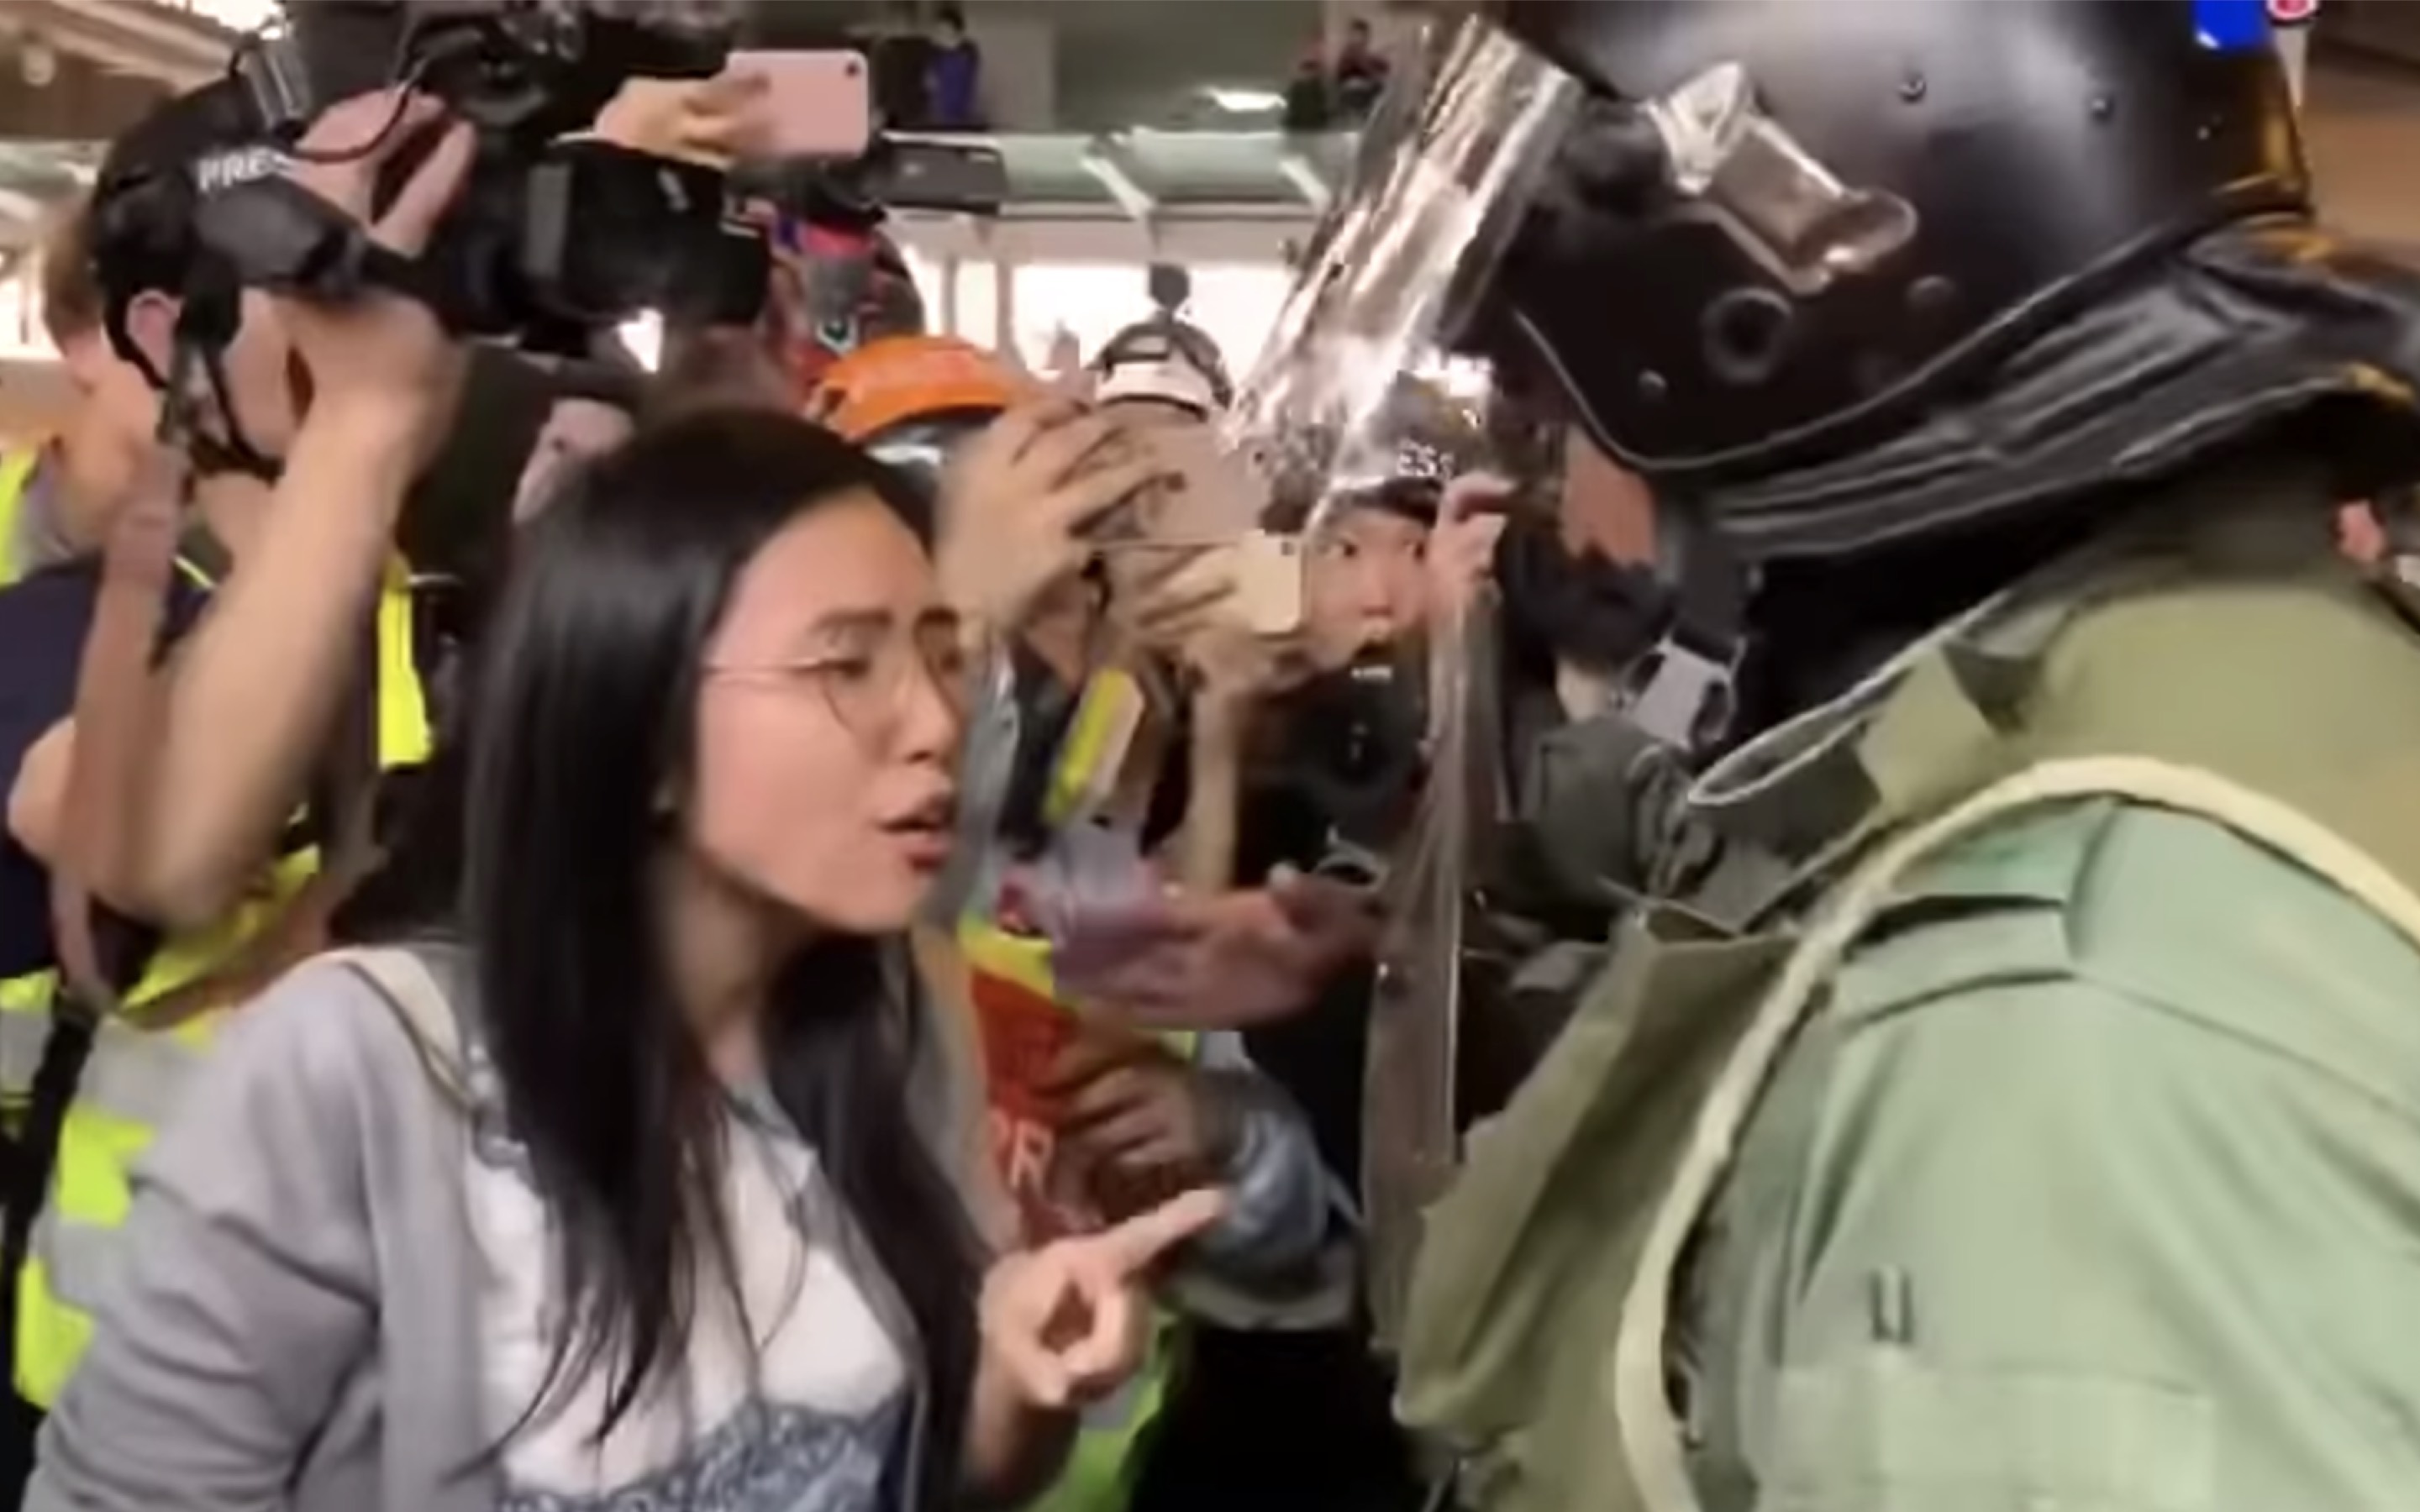 Kwong Po-yin was filmed wagging her finger at riot police in Whampoa on Sunday evening. Screengrab via YouTube.